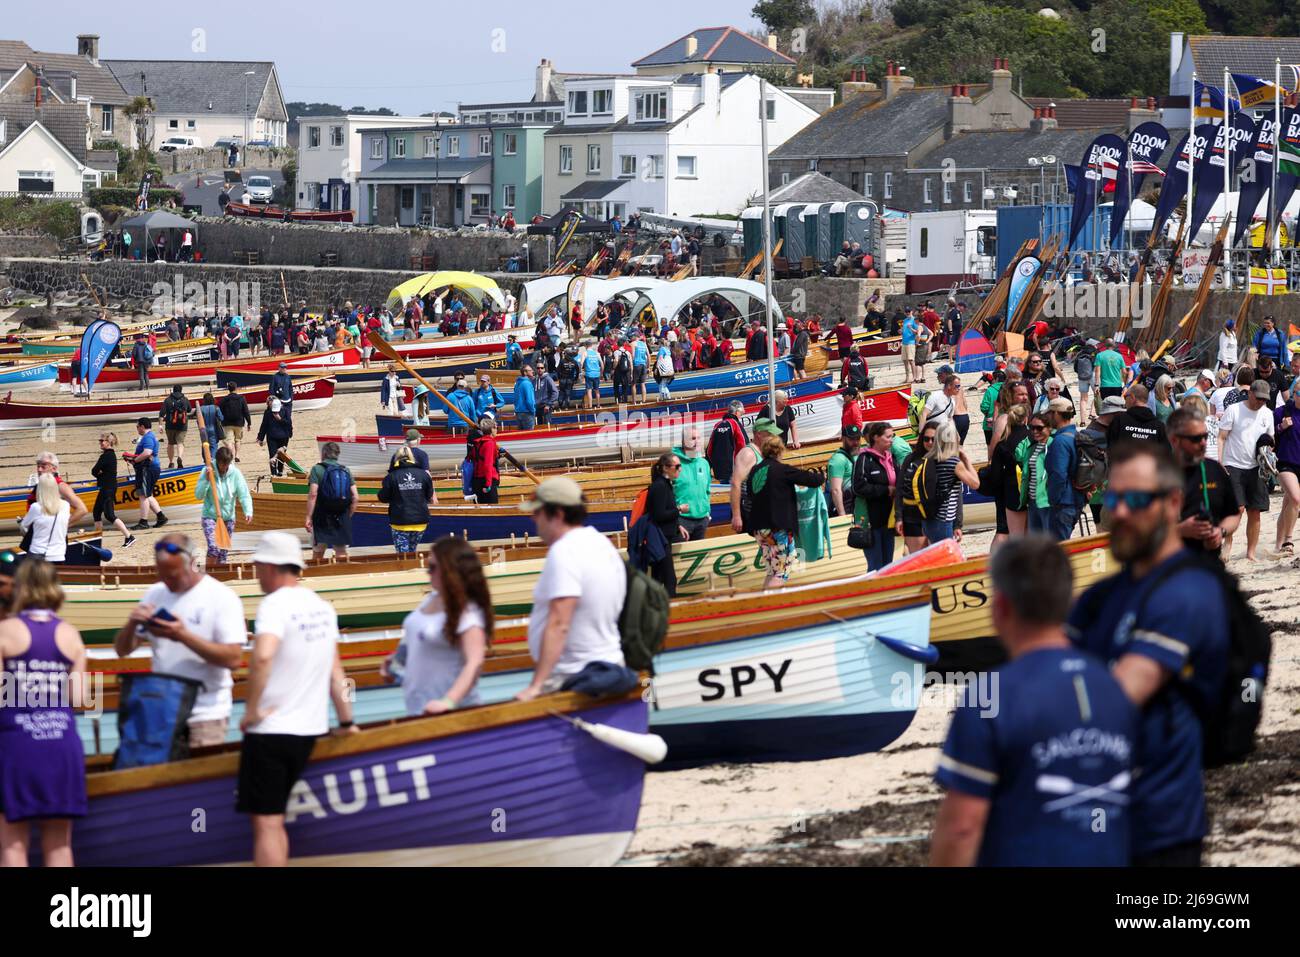 A general view of Town Beach during the annual World Pilot Gig rowing ...